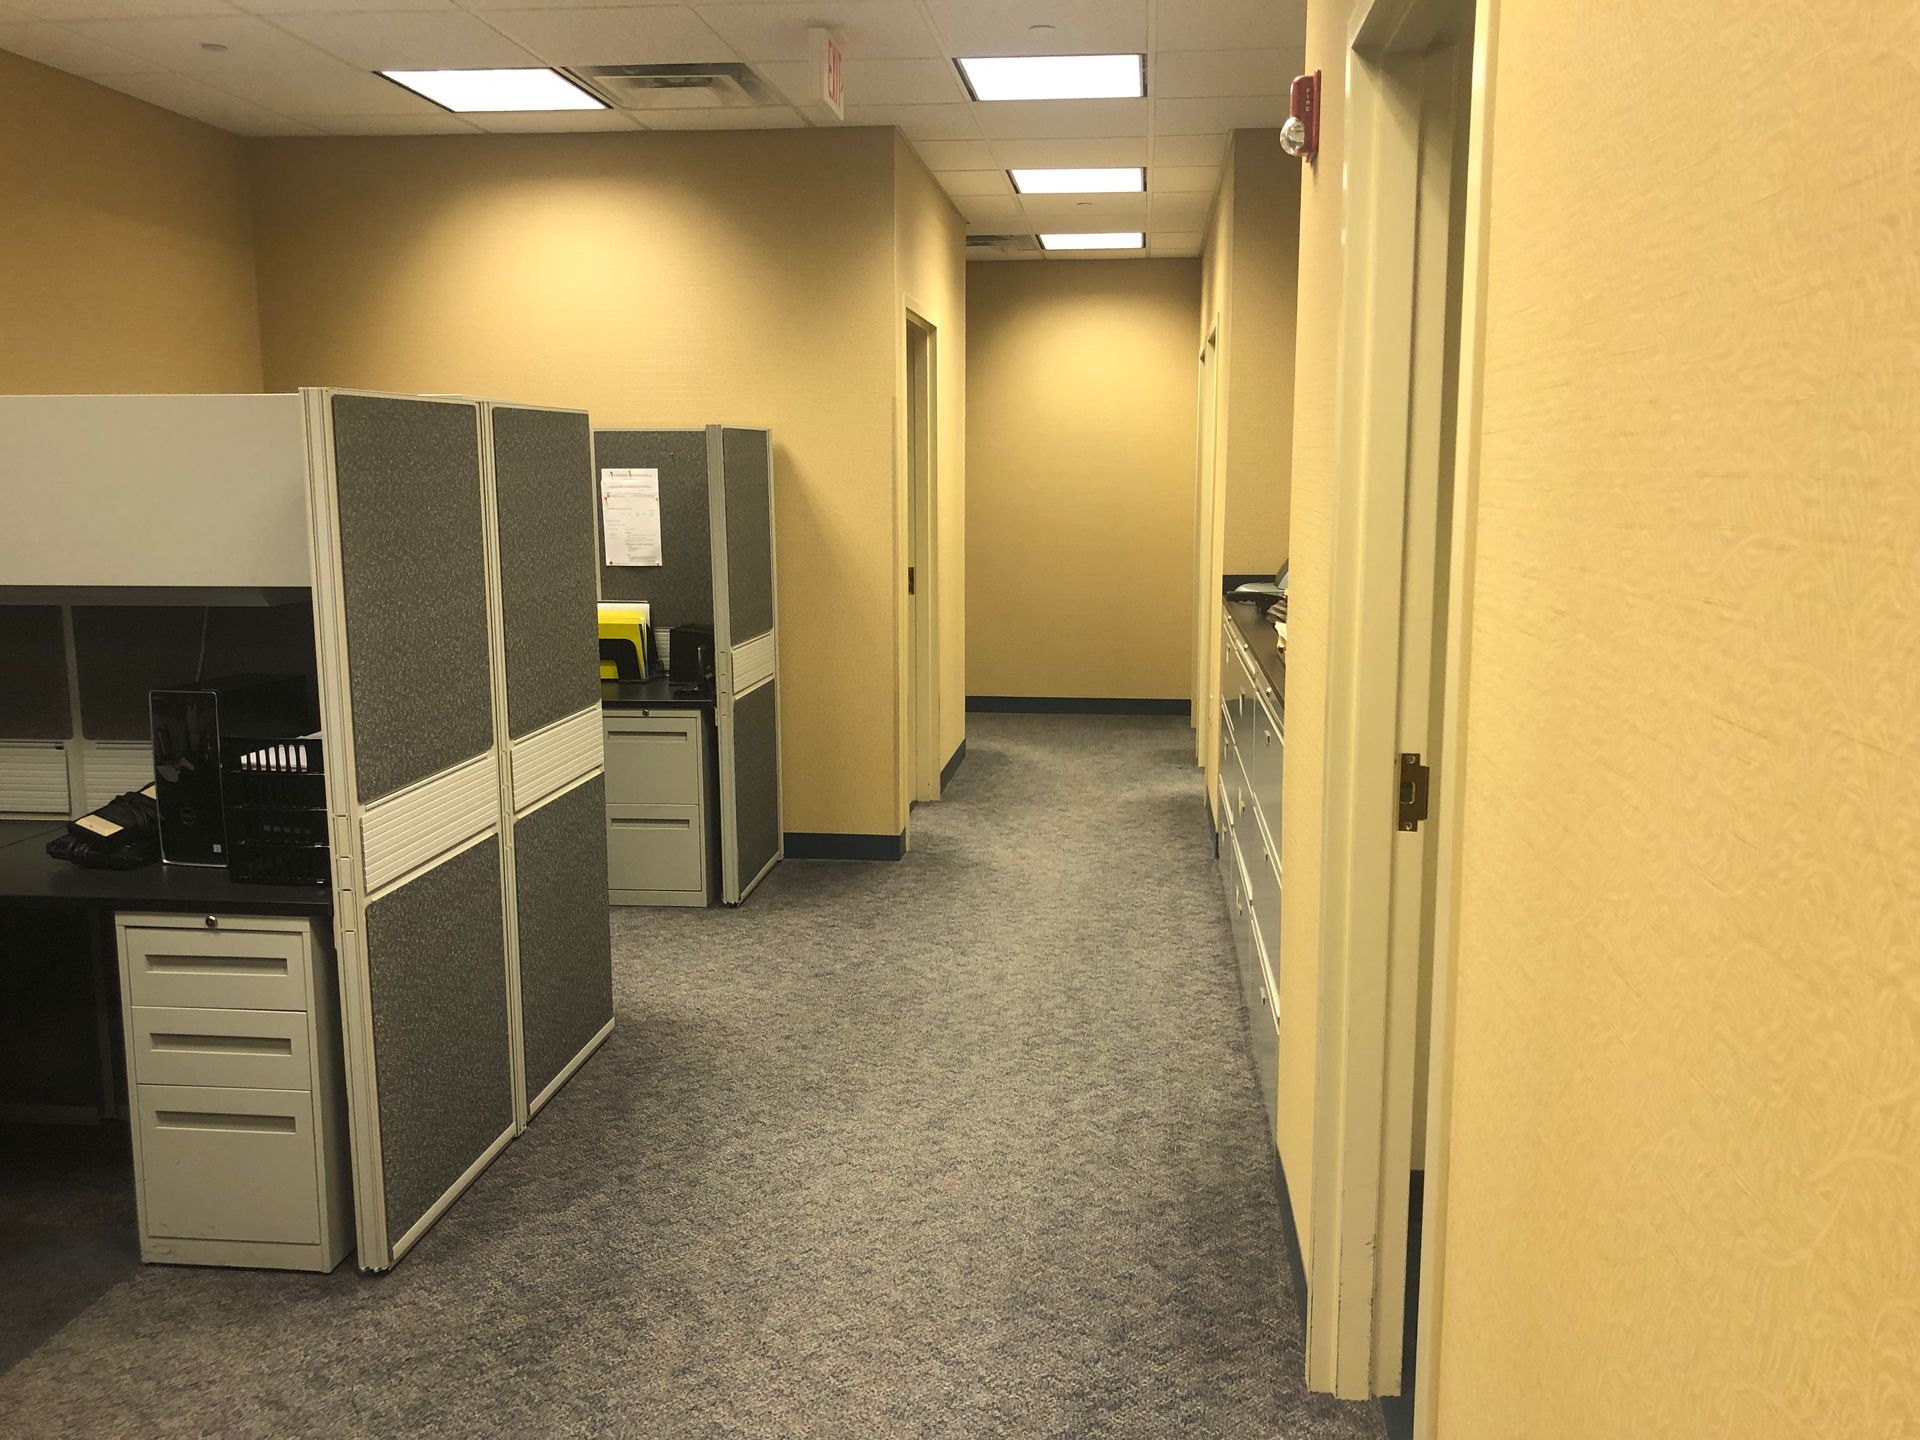 Hallway - Clifton, NJ - Evergreen Commercial Real Estate Brokers Inc